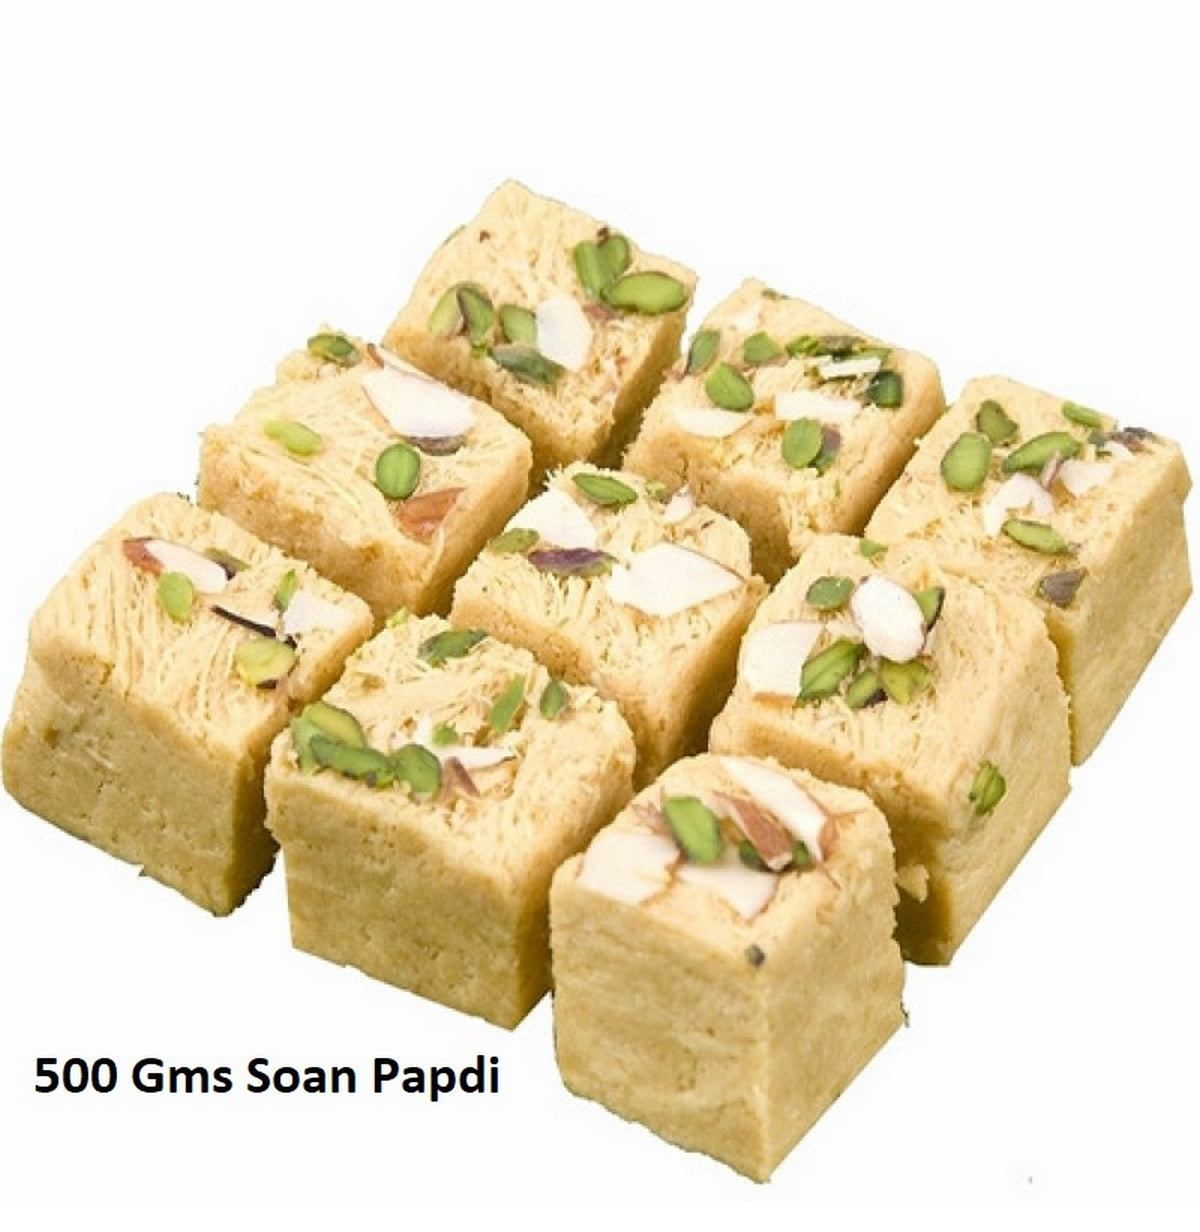 Designer Floral Rakhi with Soan Papdi (500 Gm) and Roli Chawal Pack, Best Wishes Greeting Card 2